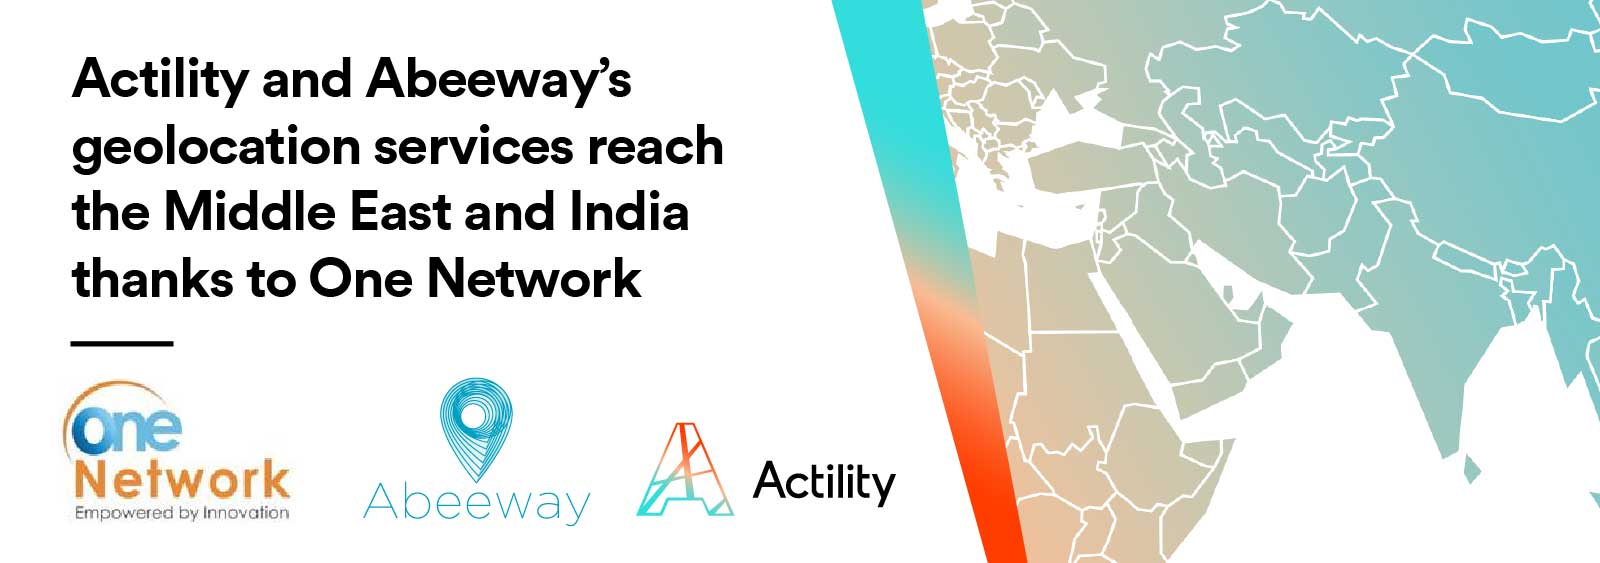 Image with embedded text saying: "Actility and Abeeway’s geolocation services reach the Middle East and India thanks to One Network"